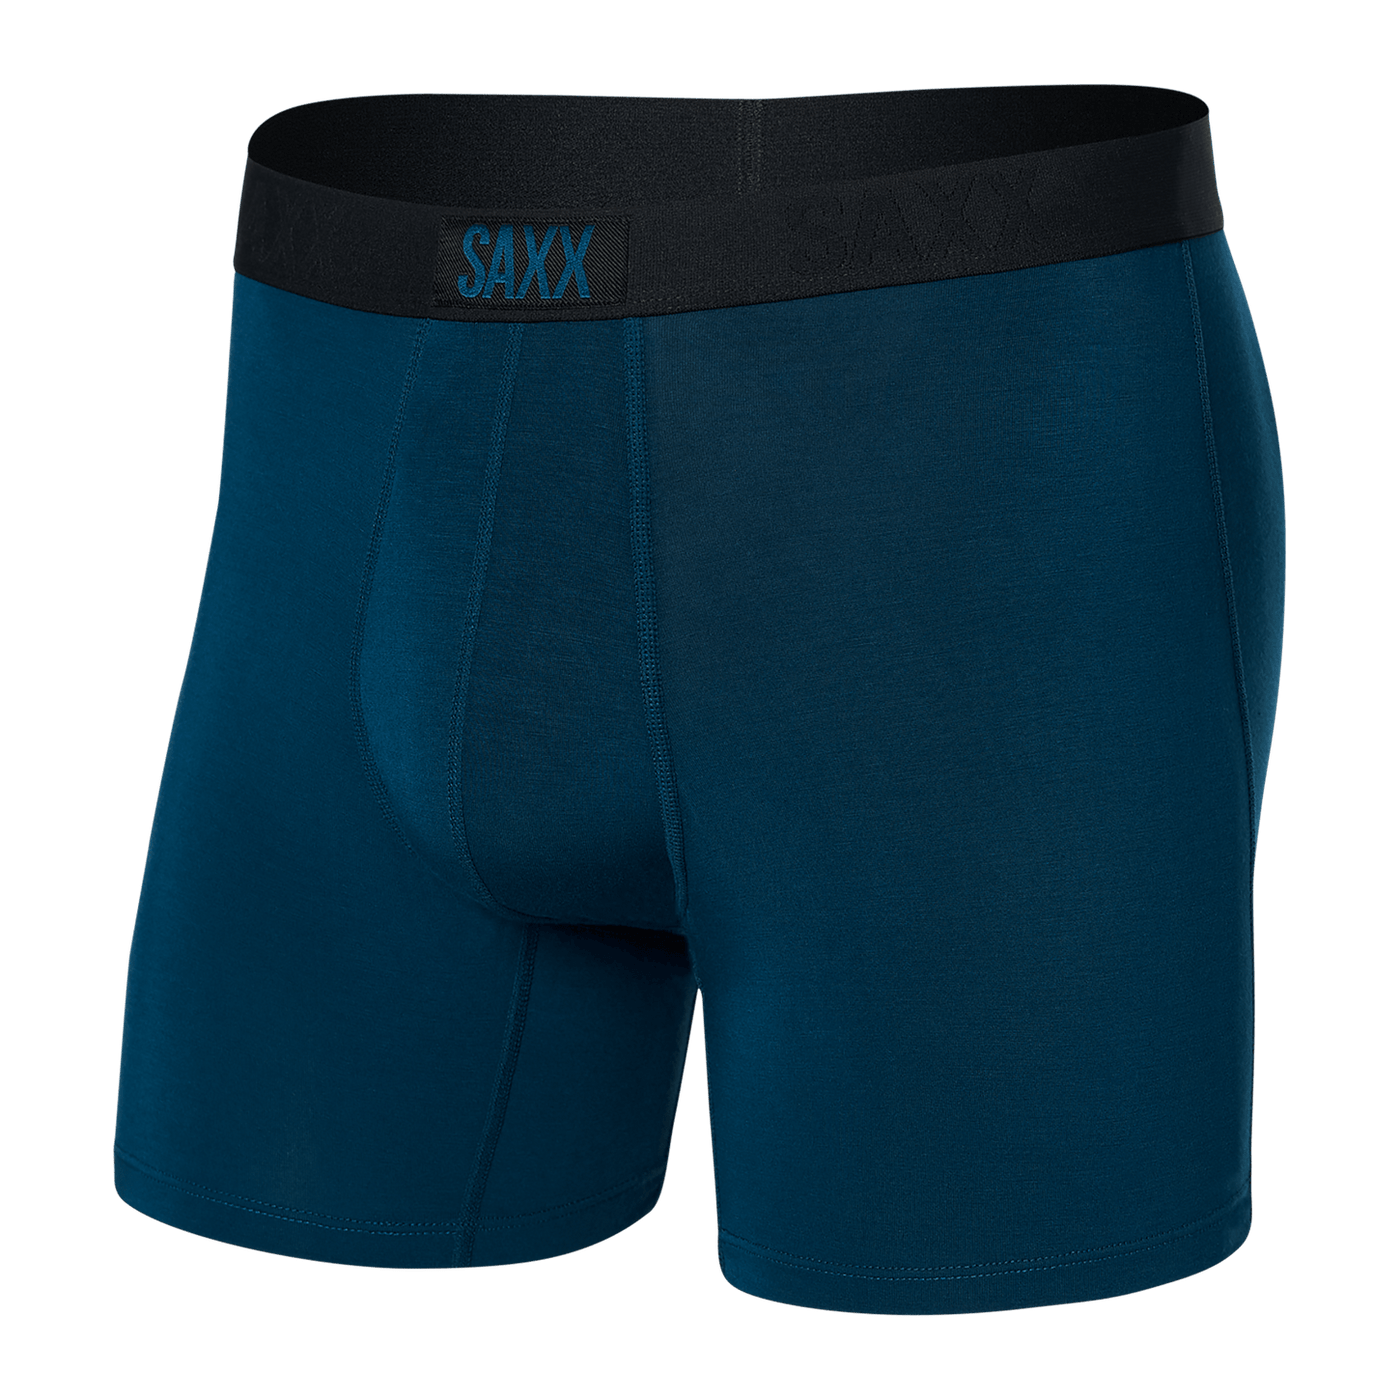 Saxx Vibe Boxers - Anchor Teal - The Hockey Shop Source For Sports